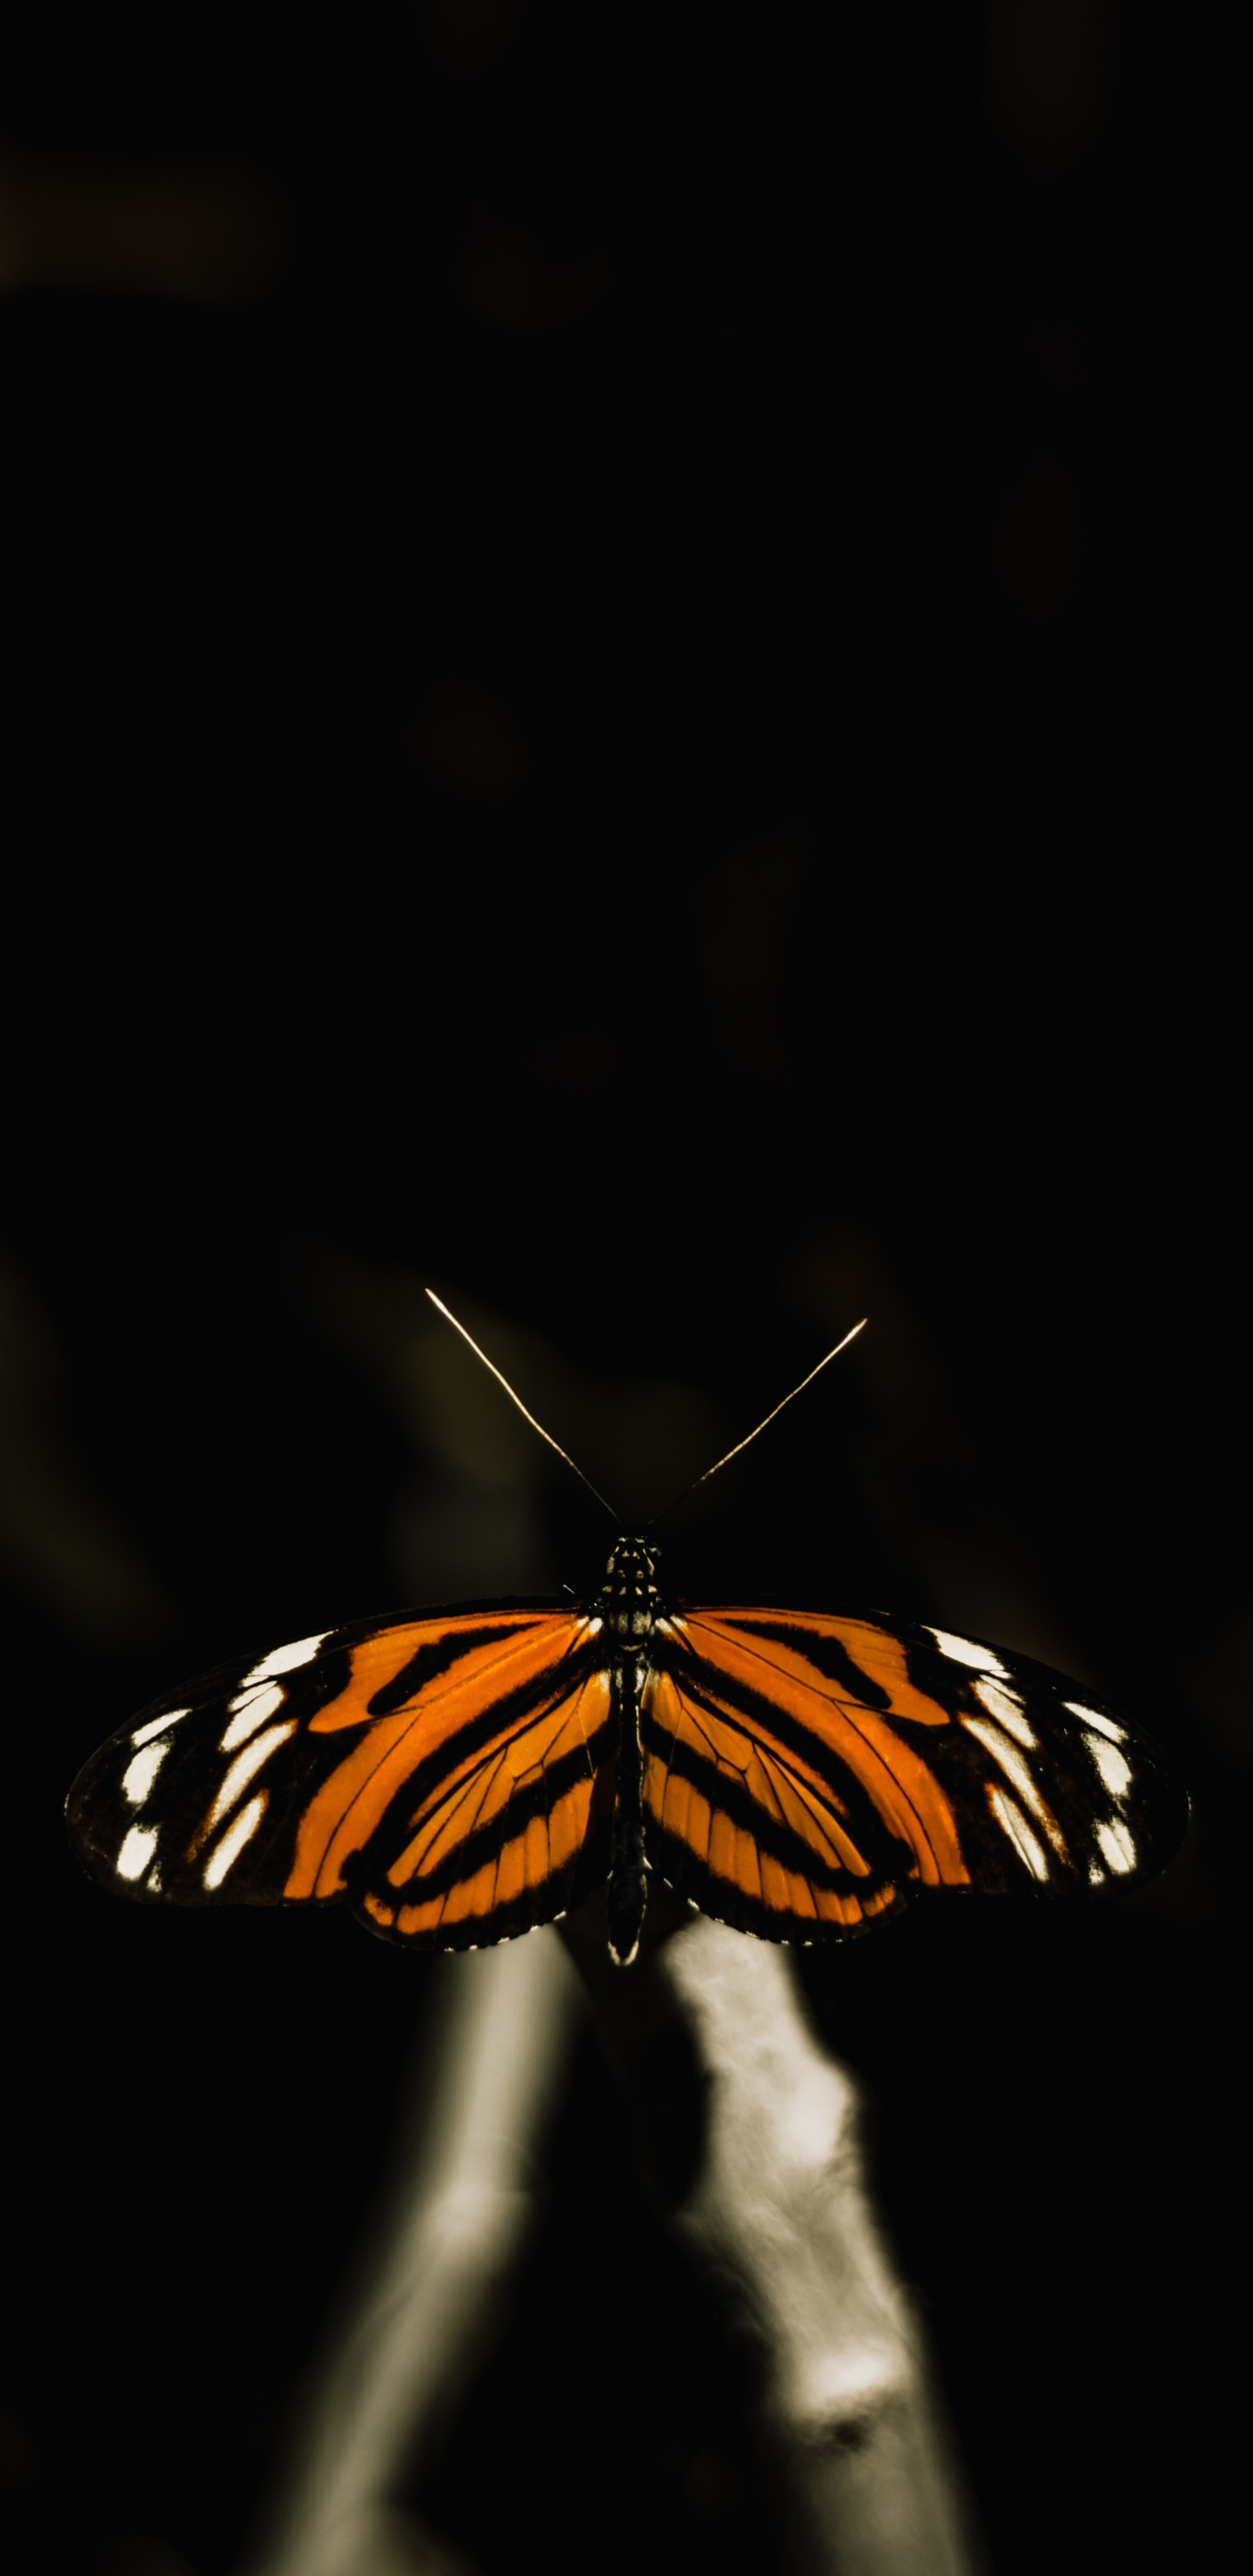 Black and White Butterfly on Black Background. Wallpaper in 1440x2960 Resolution